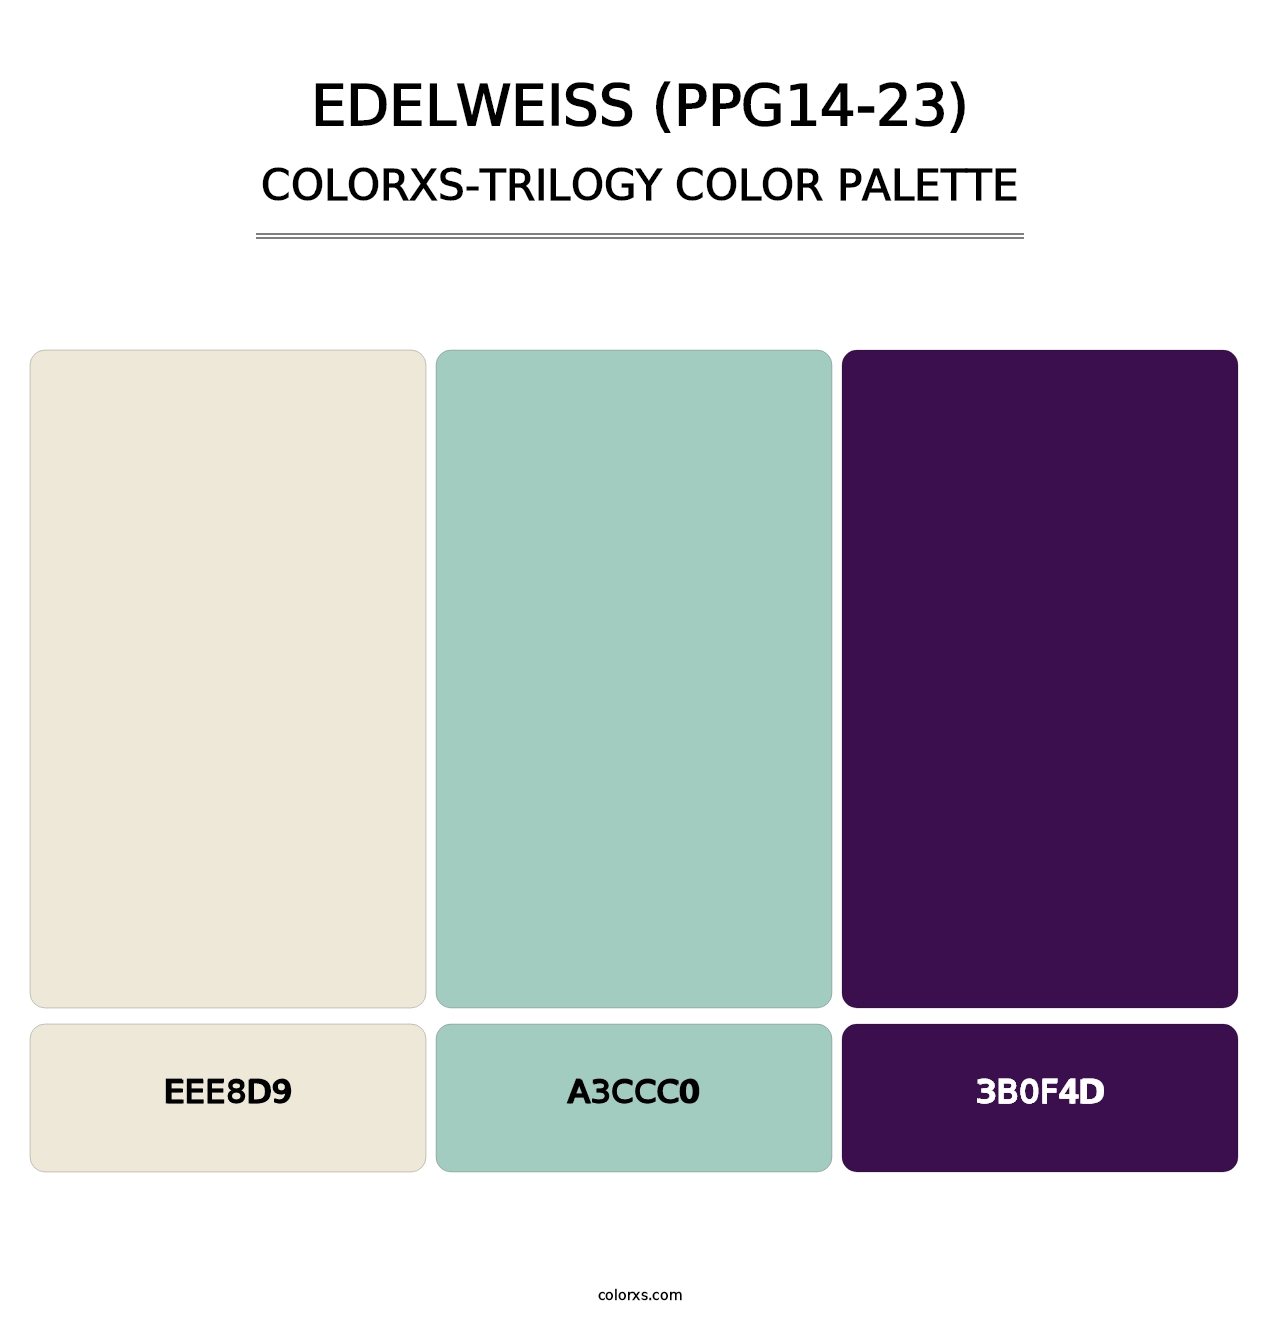 Edelweiss (PPG14-23) - Colorxs Trilogy Palette